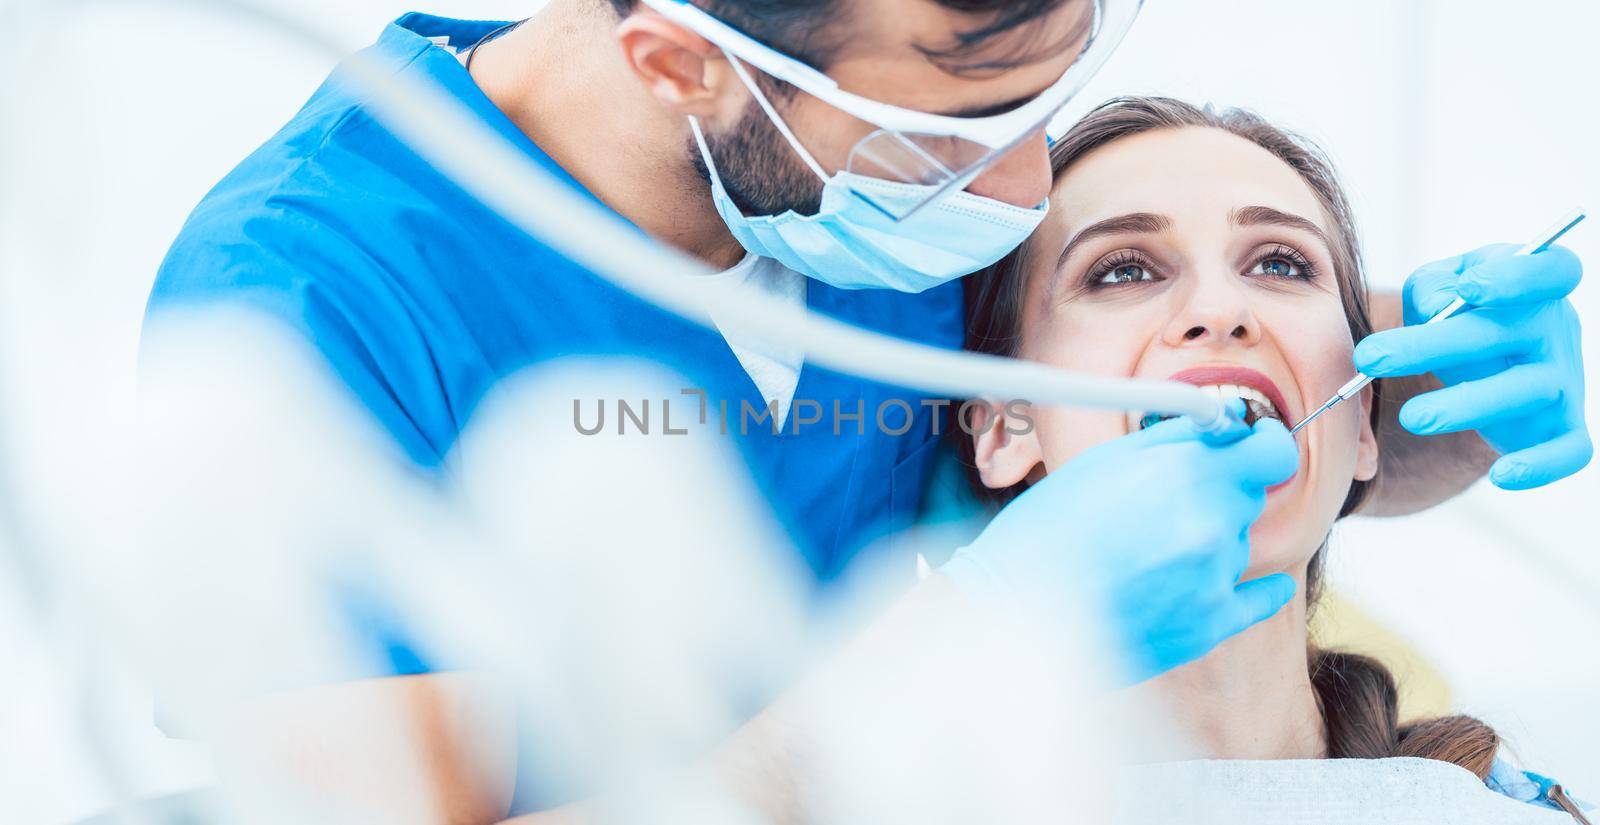 Beautiful young woman looking up relaxed during a painless dental procedure by Kzenon